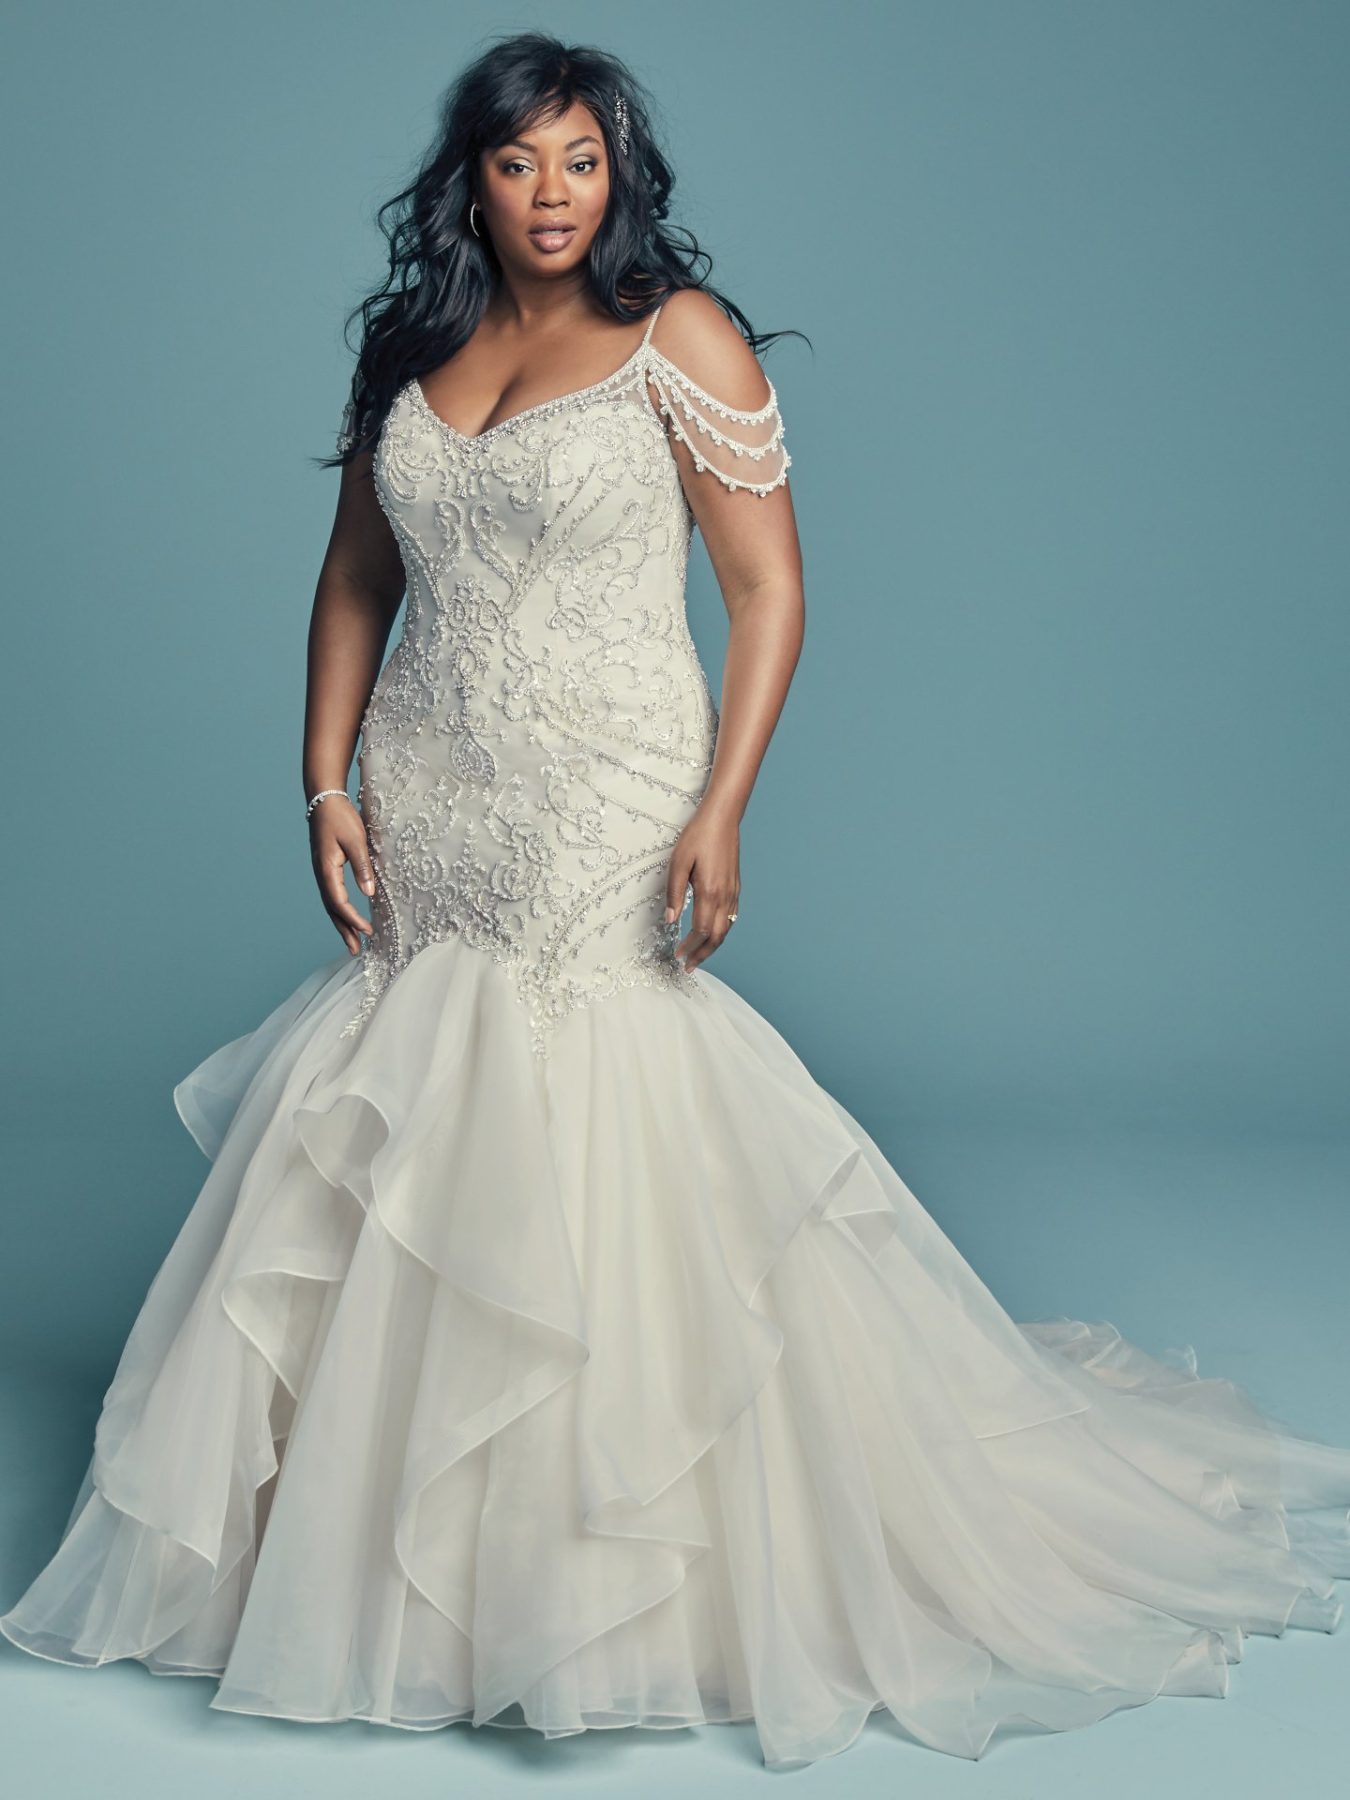 33 Plus Size Wedding Dresses For Every Style And Budget A